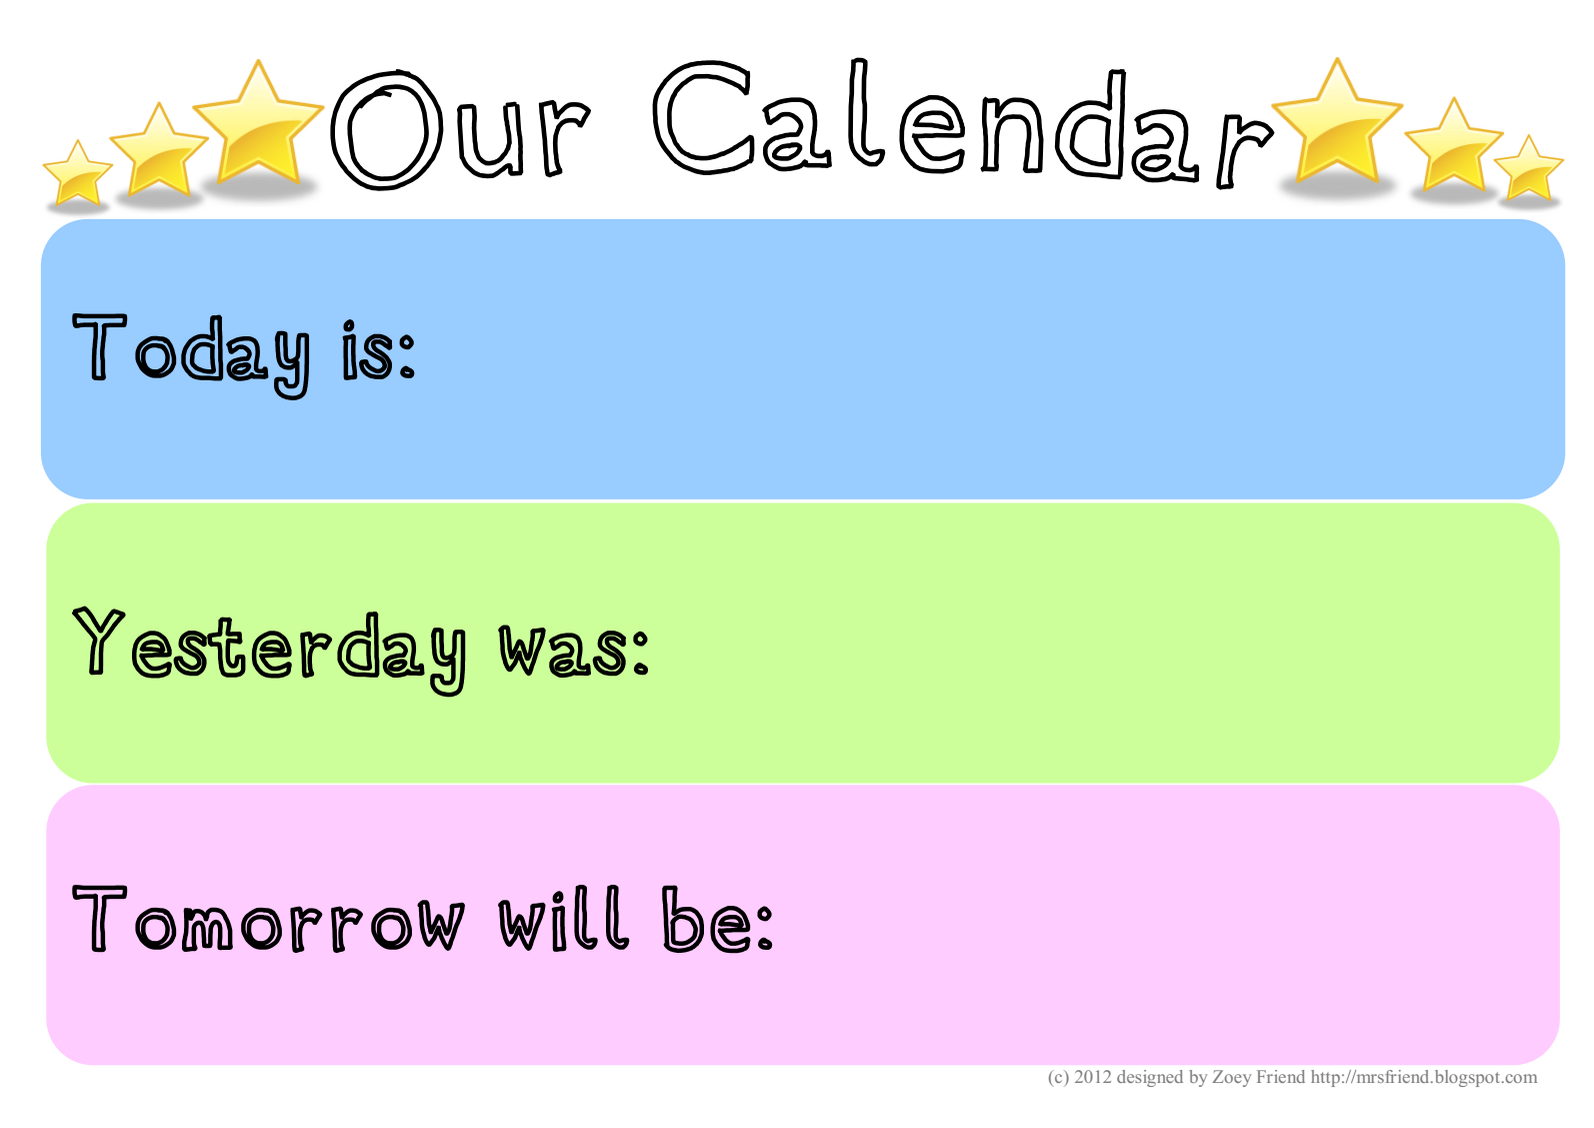 Today is. Days of the week today is. Today yesterday for Kids. Today Calendar. Yesterday is not today